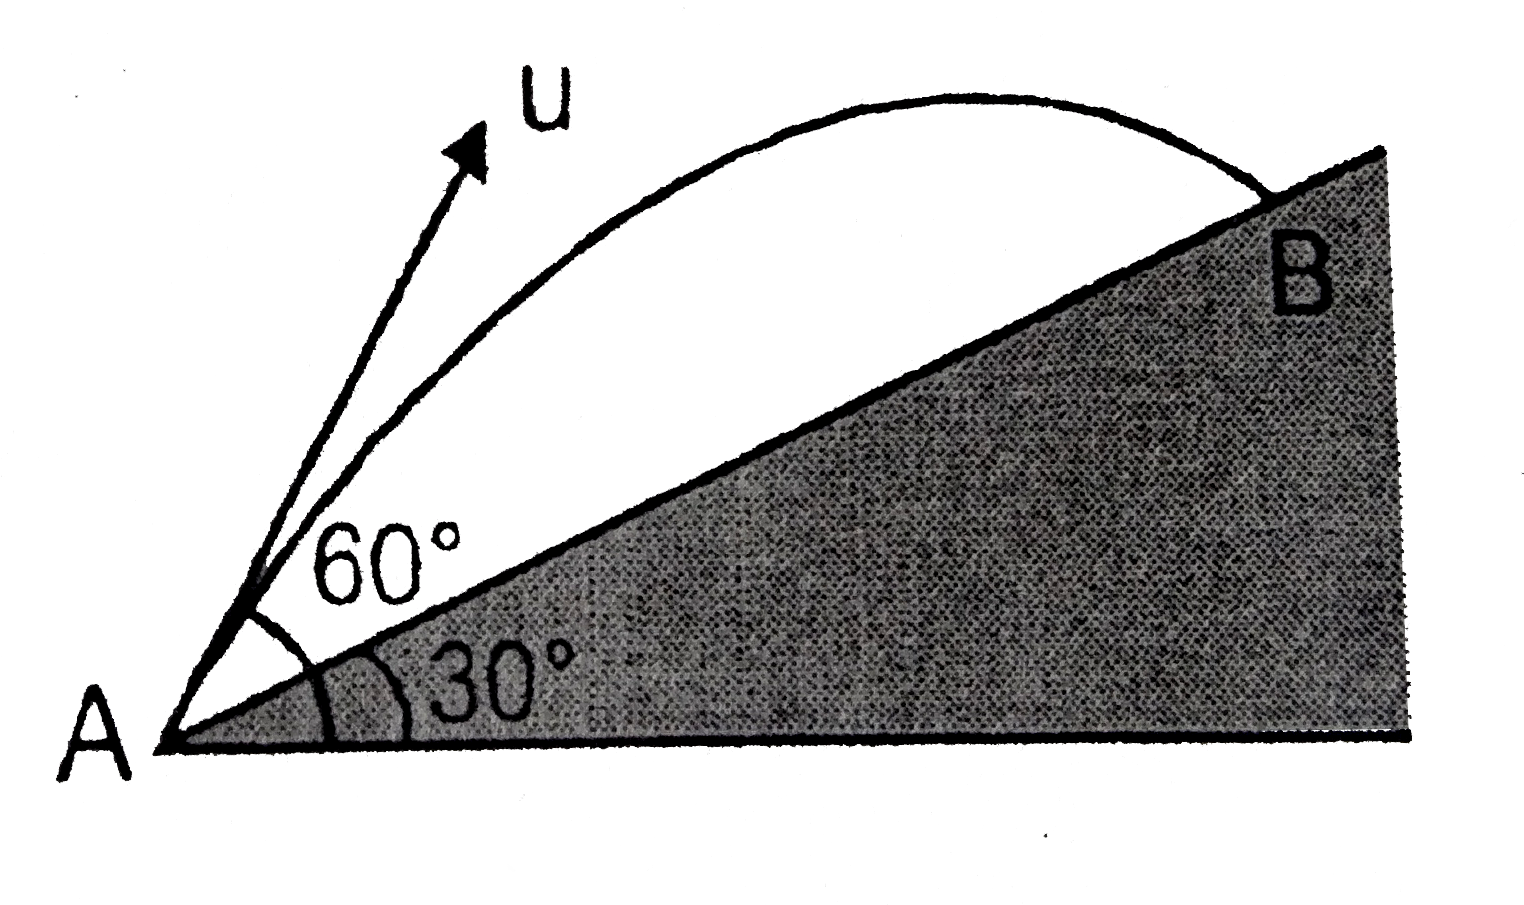 A stone is projected from point A with speed u making an angle 60^(@) with horizontal as shown. The fixed inclined surface makes an angle 30^(@) with horizontal. The stone lands at B after time t. Then the distance AB is equal to .